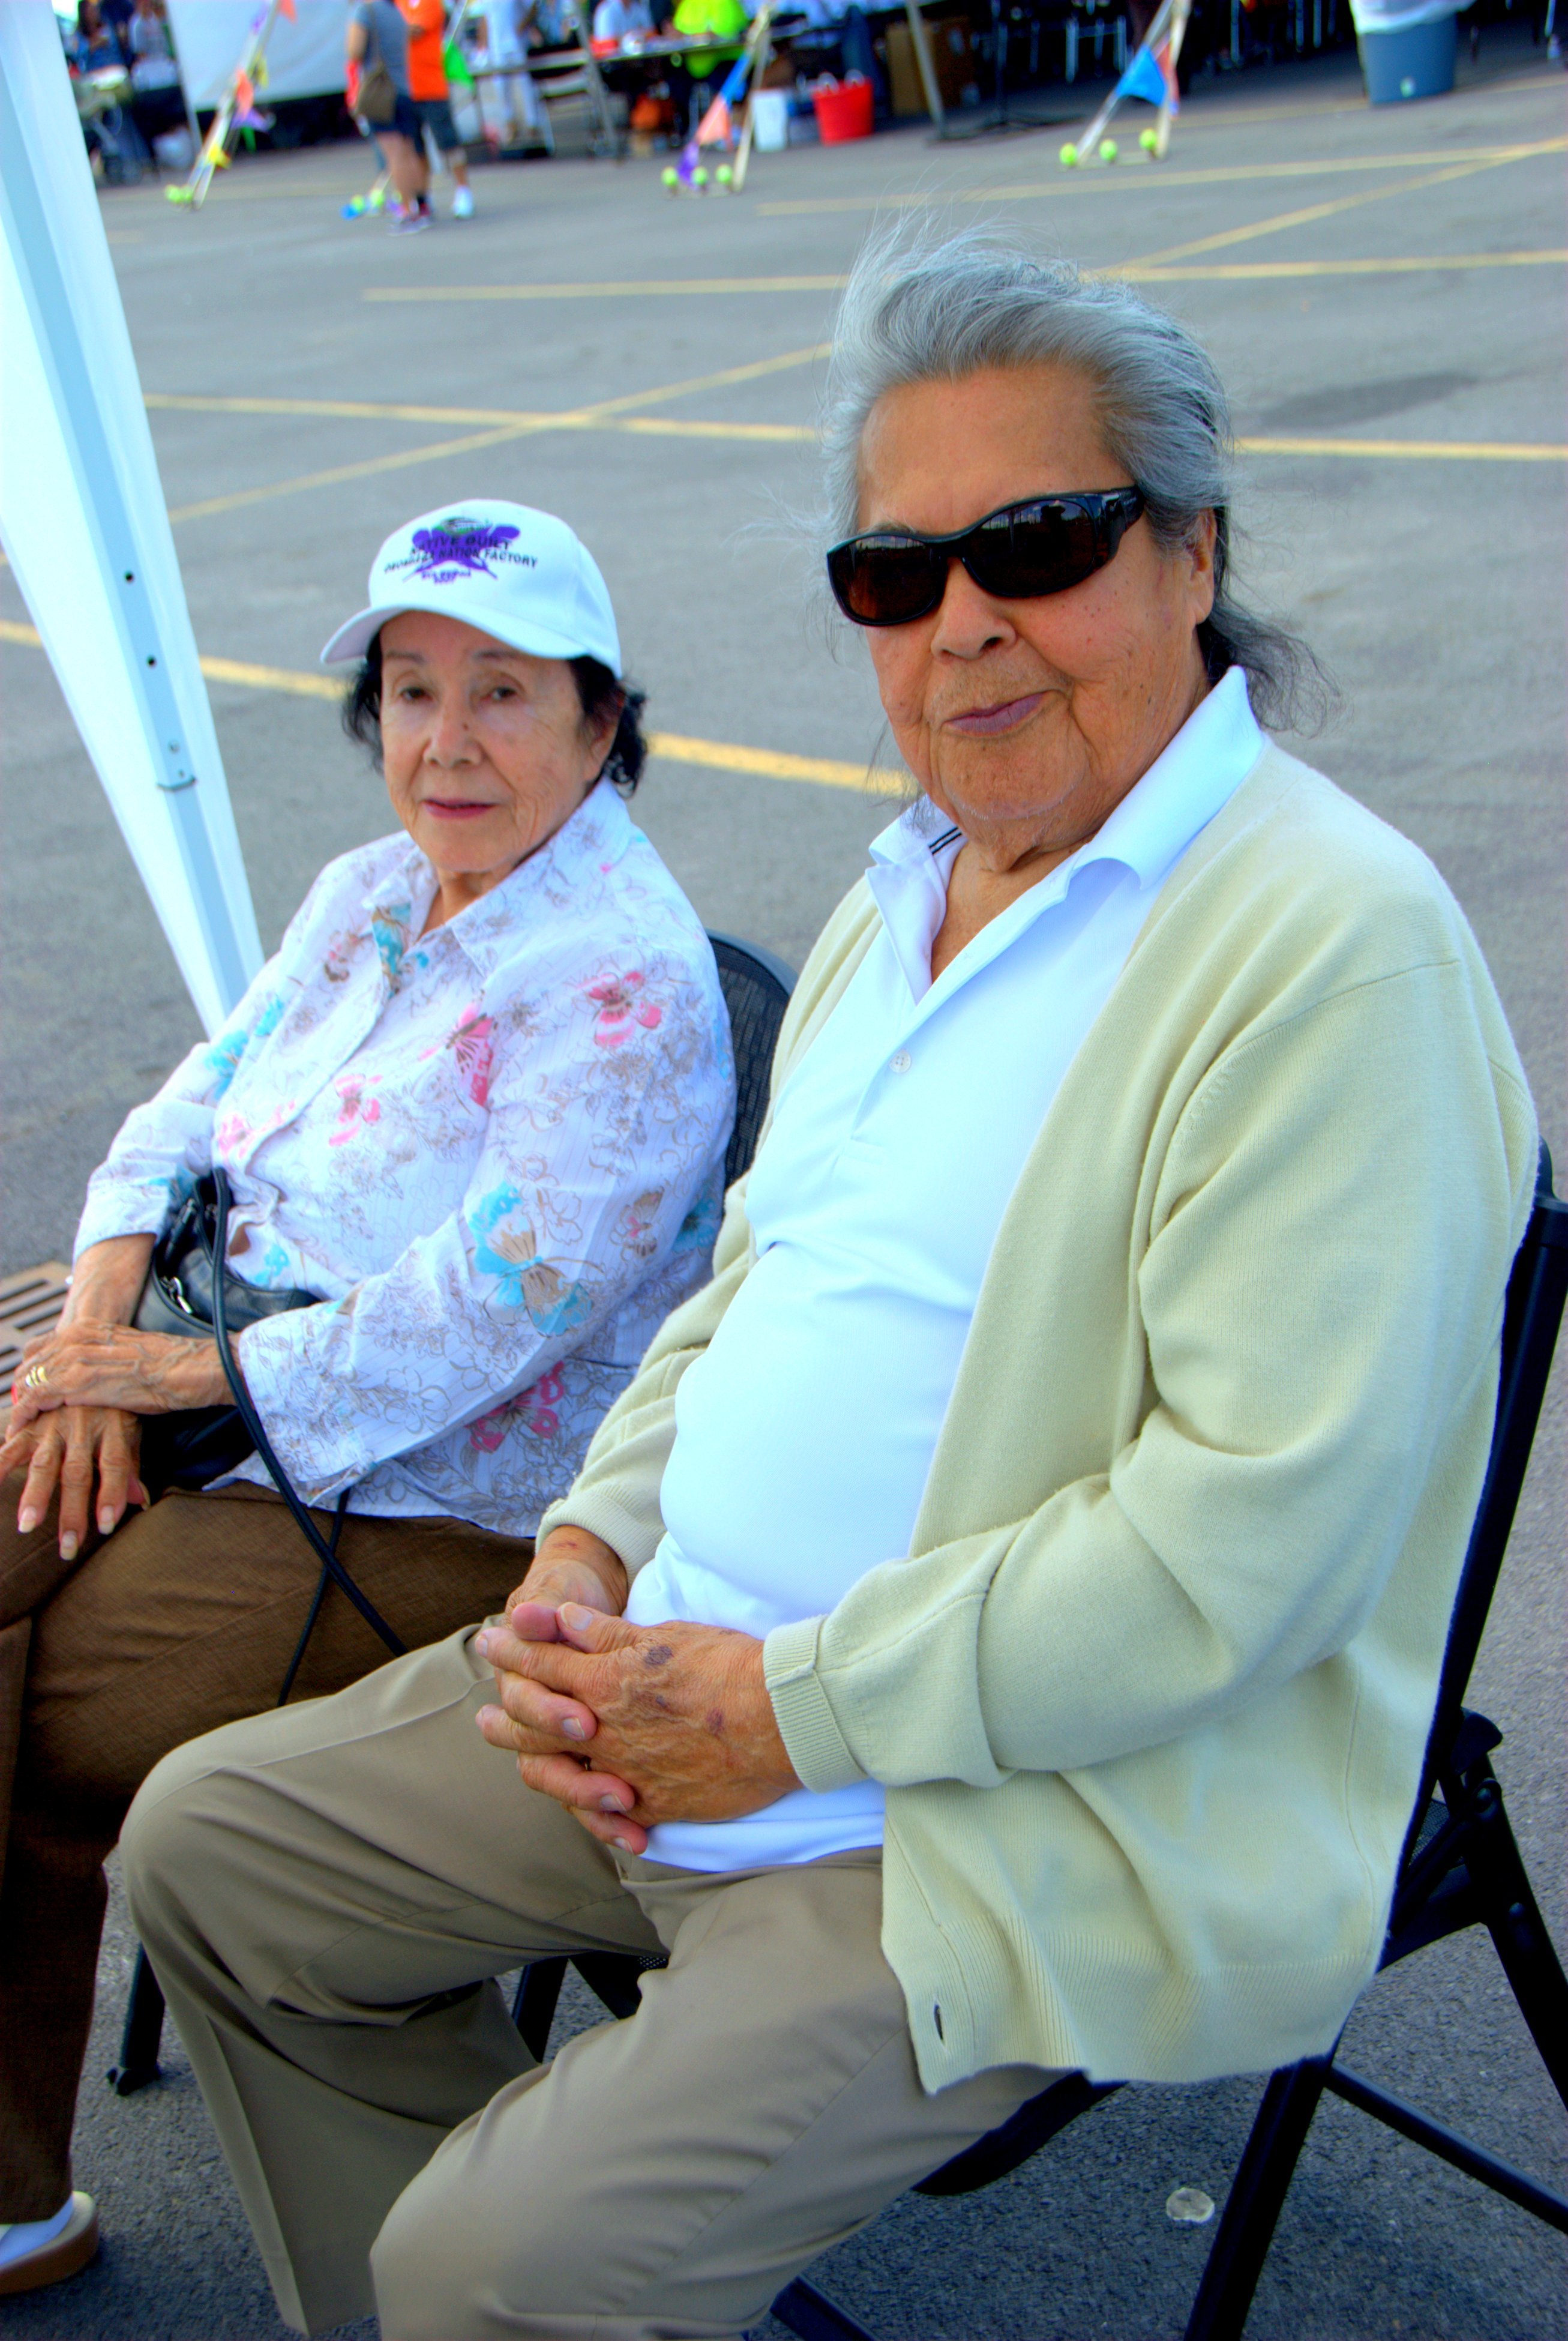 Two elder spectators at the Saint Regis Mohawk Tribes Annual Ironworkers competition in Akwesasne, New York sit back and enjoy the fun. (Vincent Schilling)